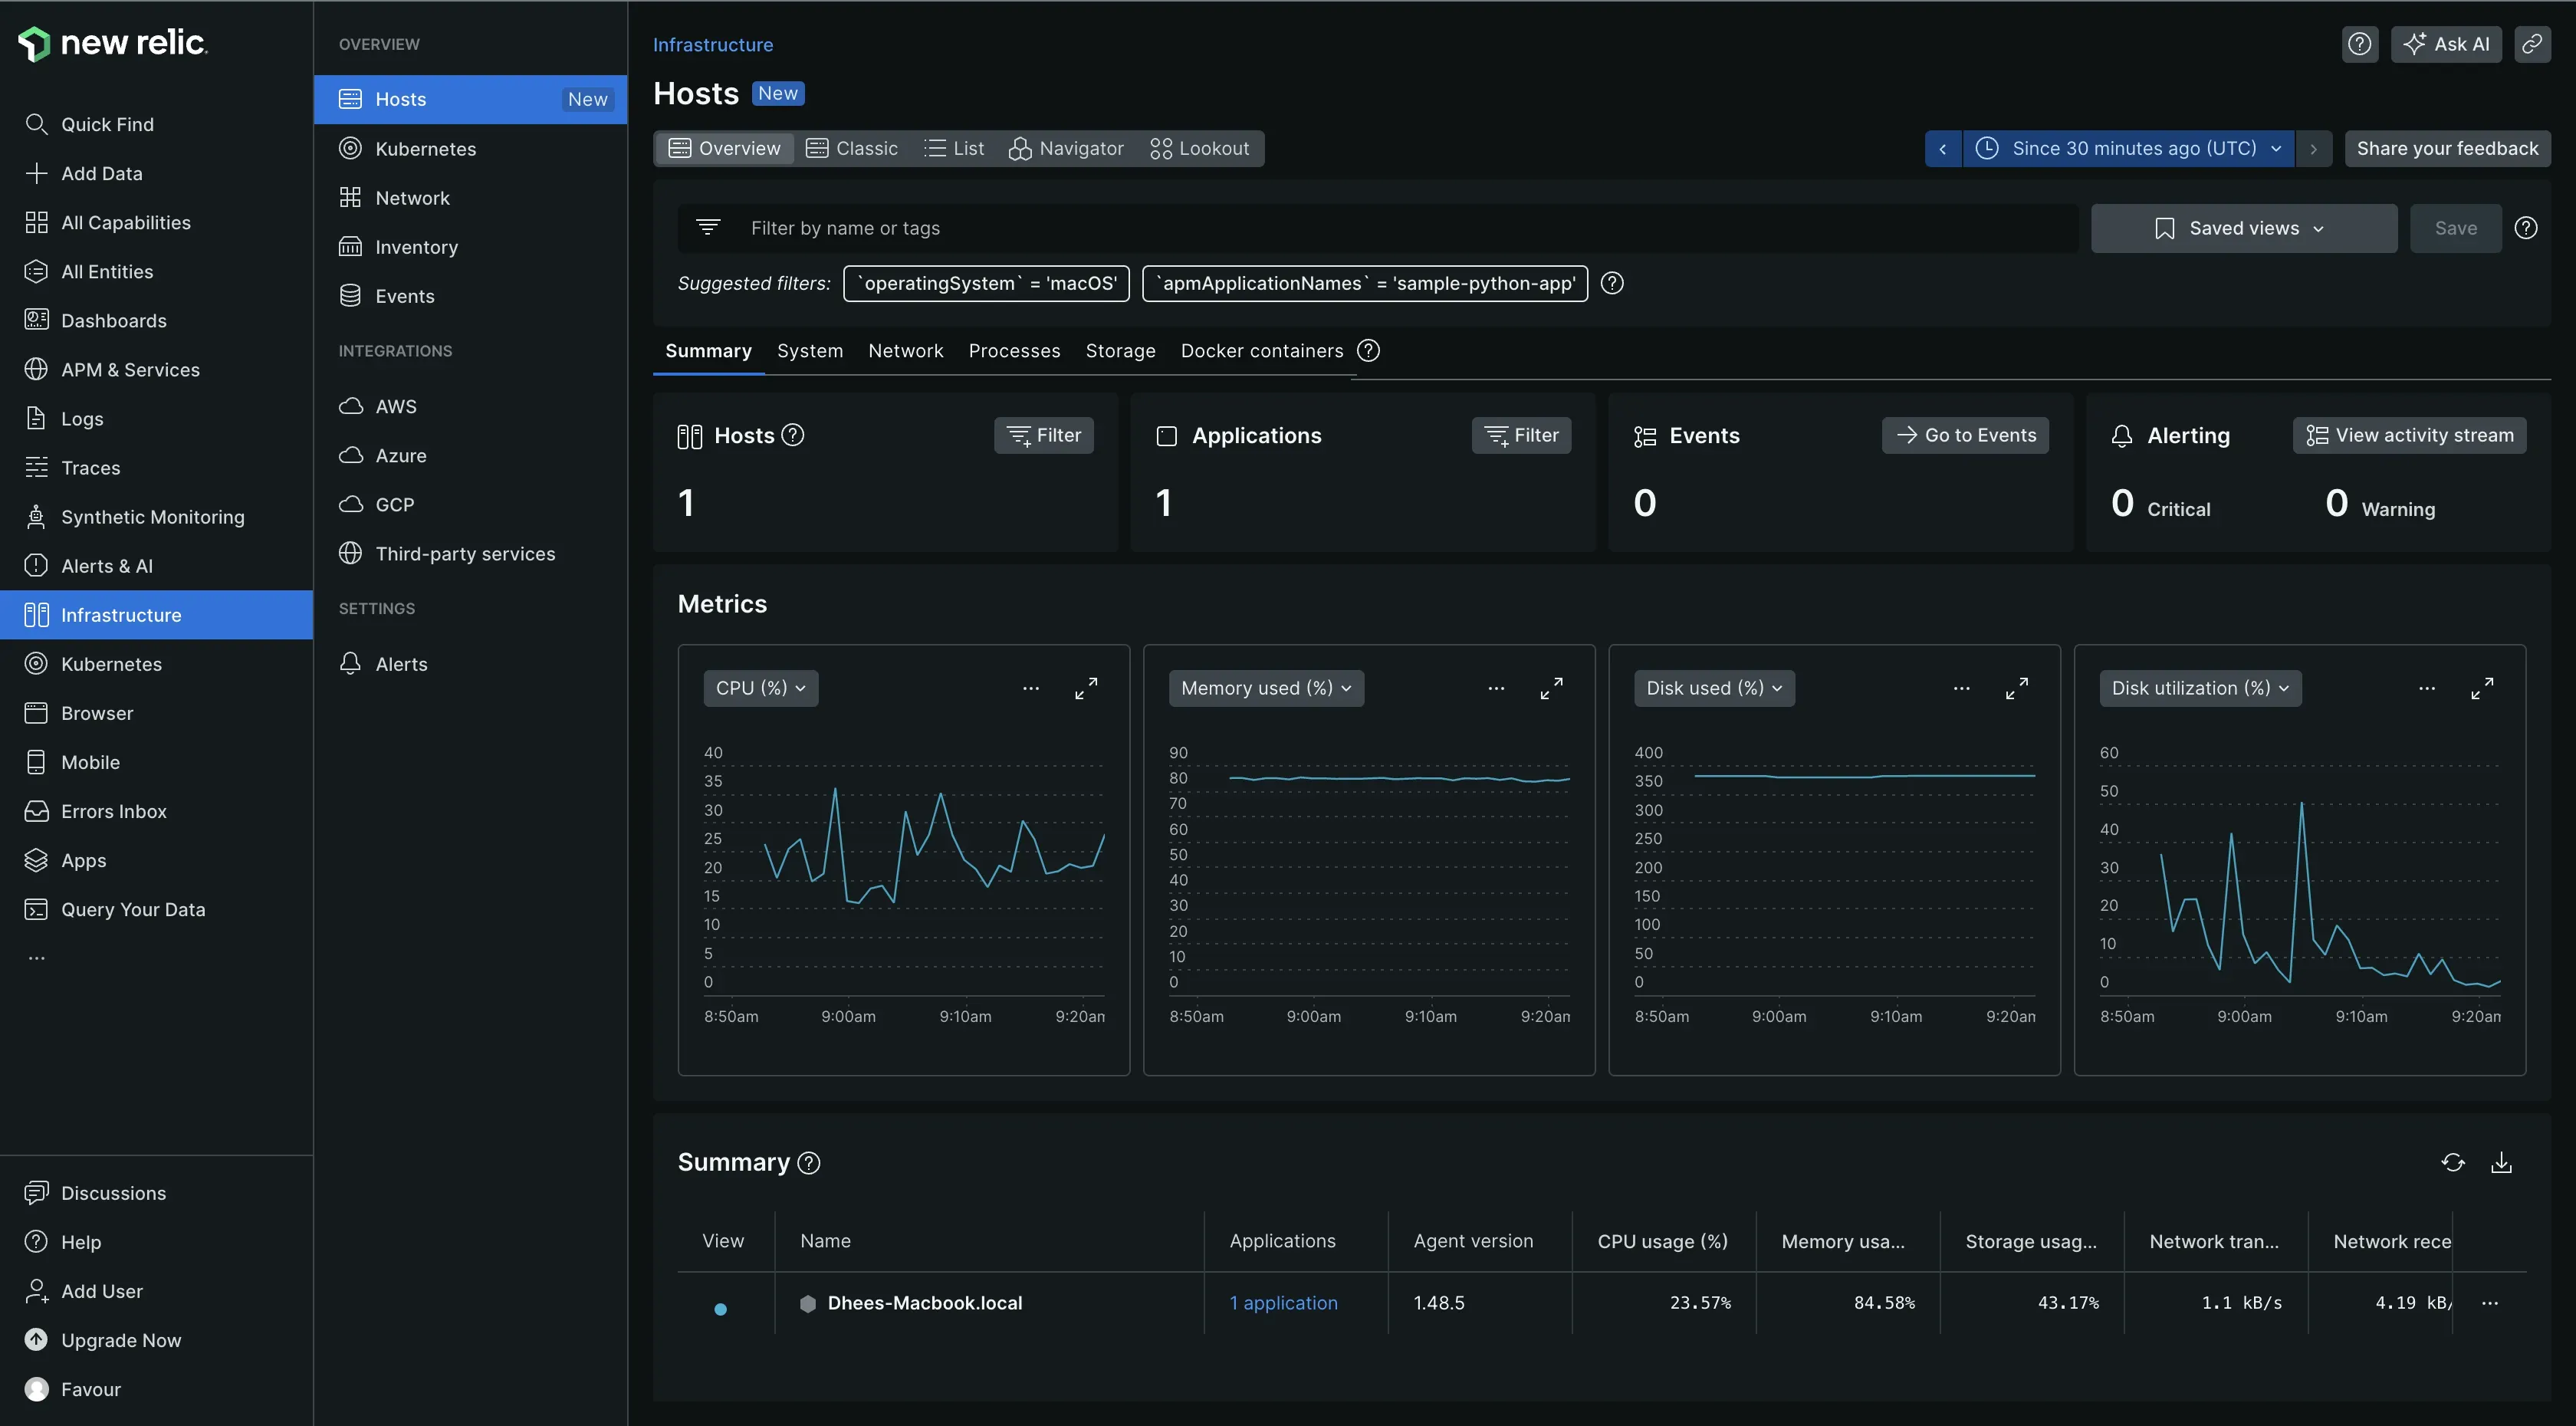 Infrastructure monitoring dashboard in NewRelic